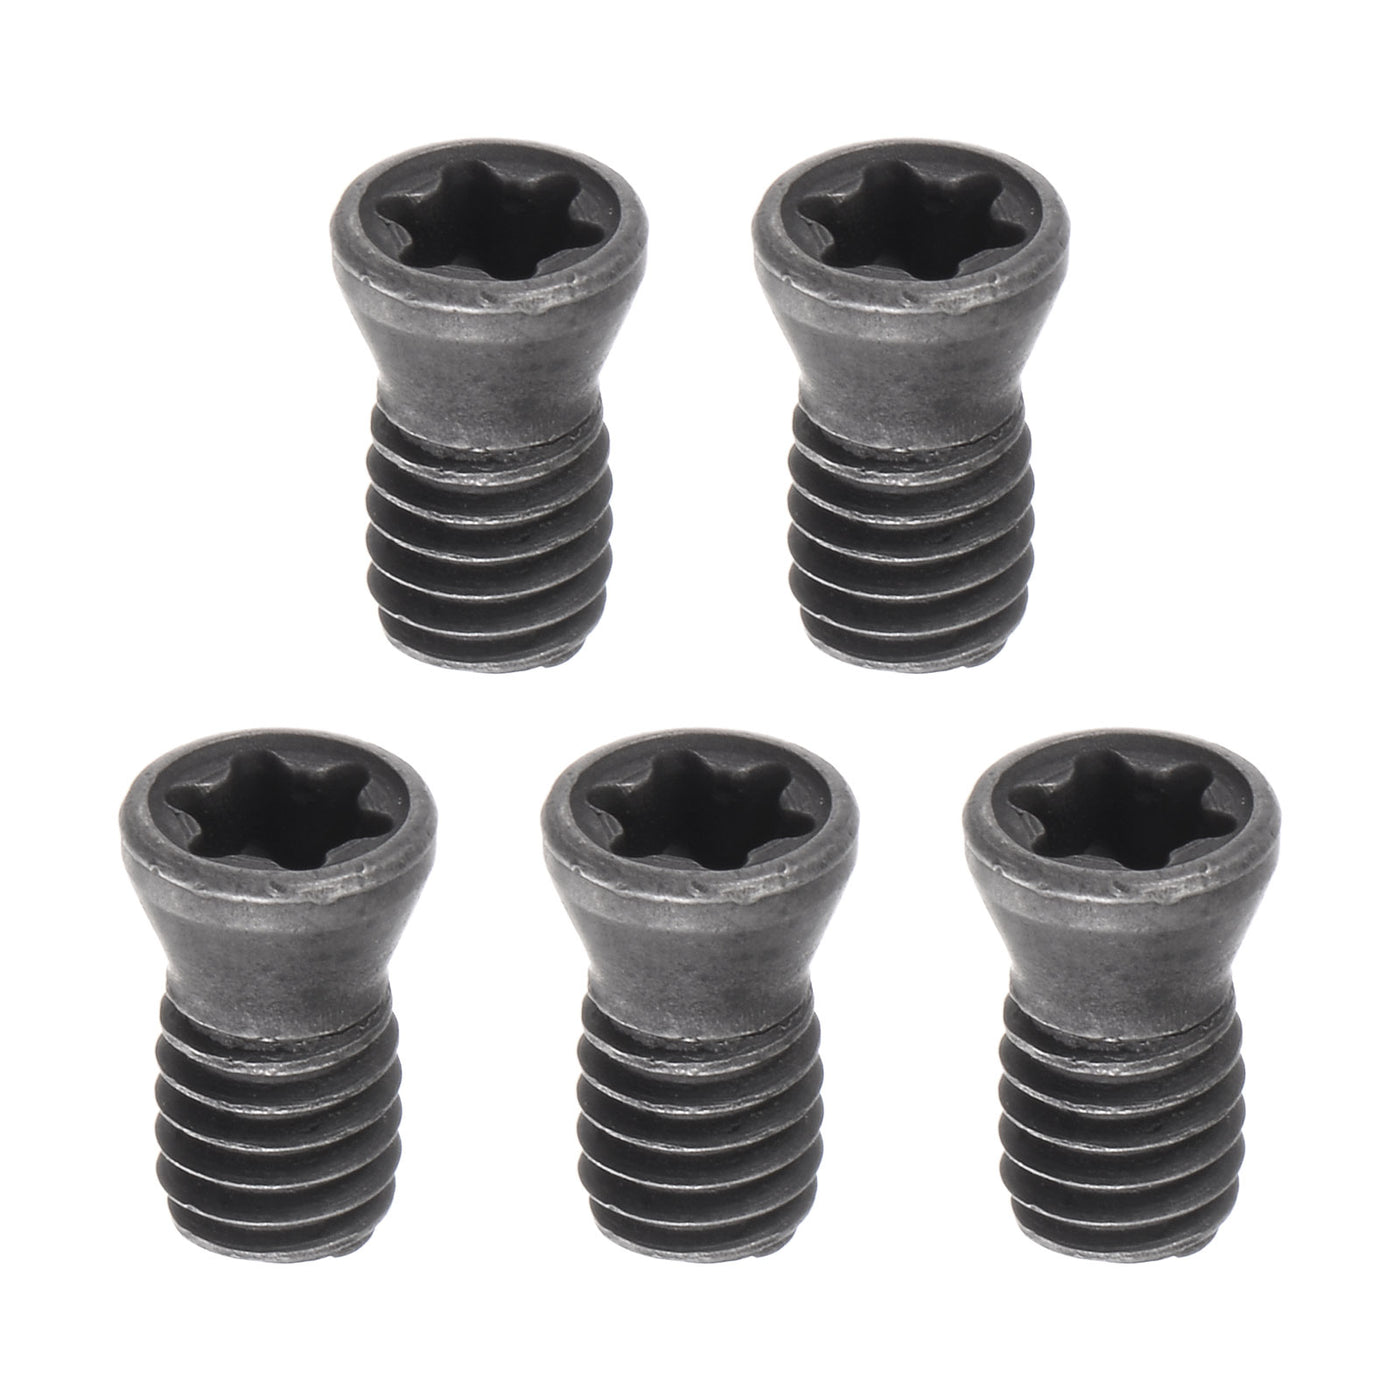 uxcell Uxcell M4x8-D5.0 Torx Set Screws for CNC Lathe Turning Tool Holder, 5Pcs